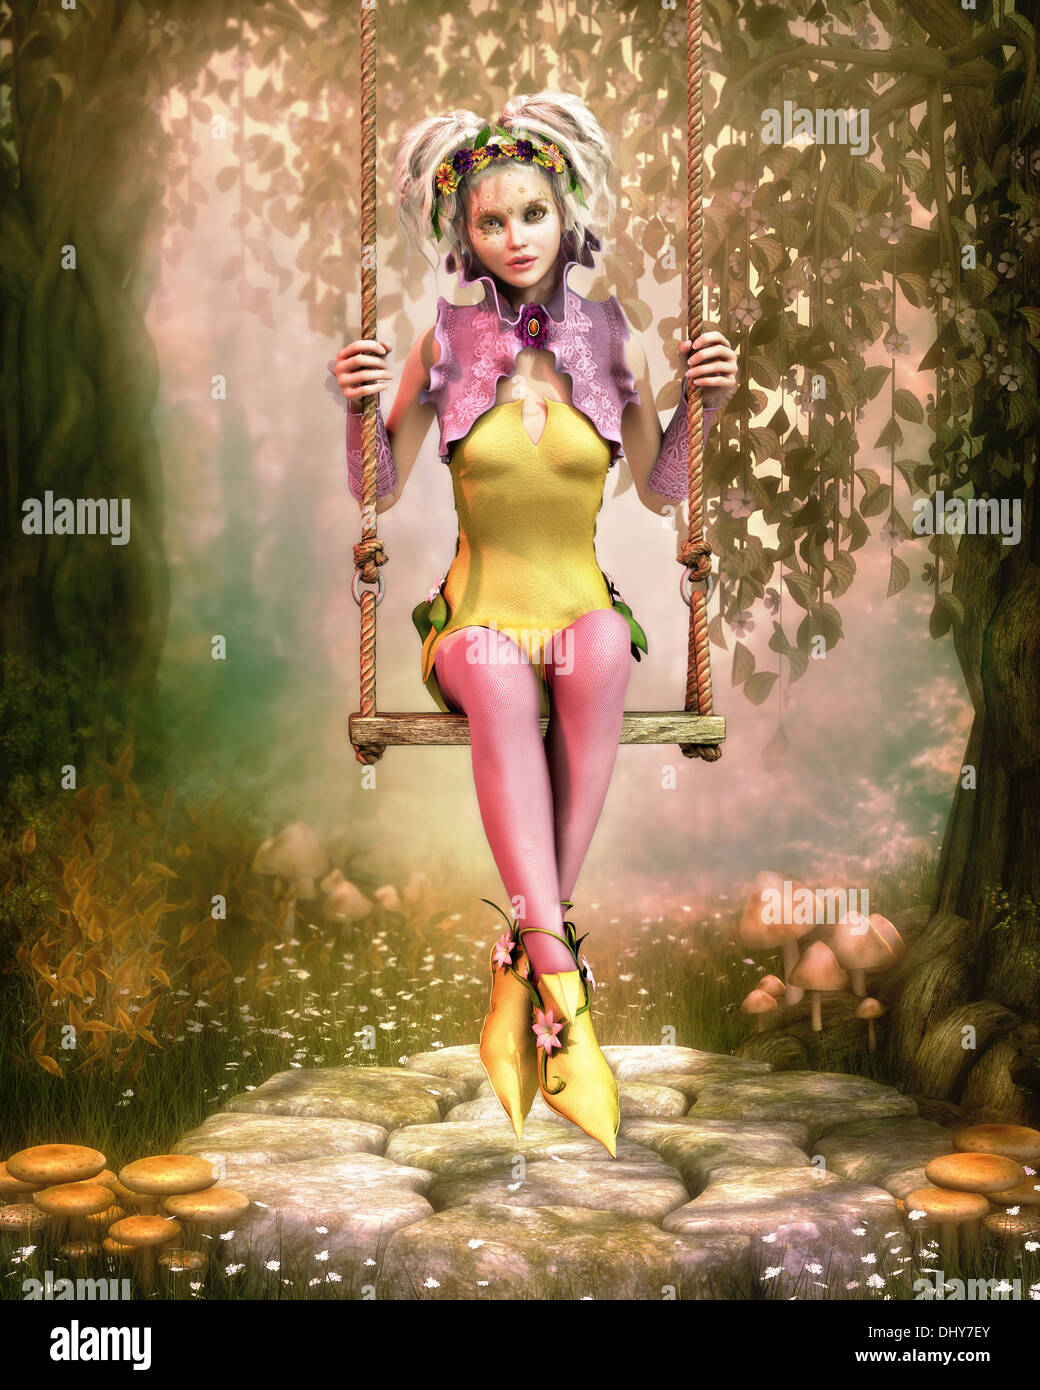 3D computer graphics of a cute fairy sitting on a swing Stock Photo